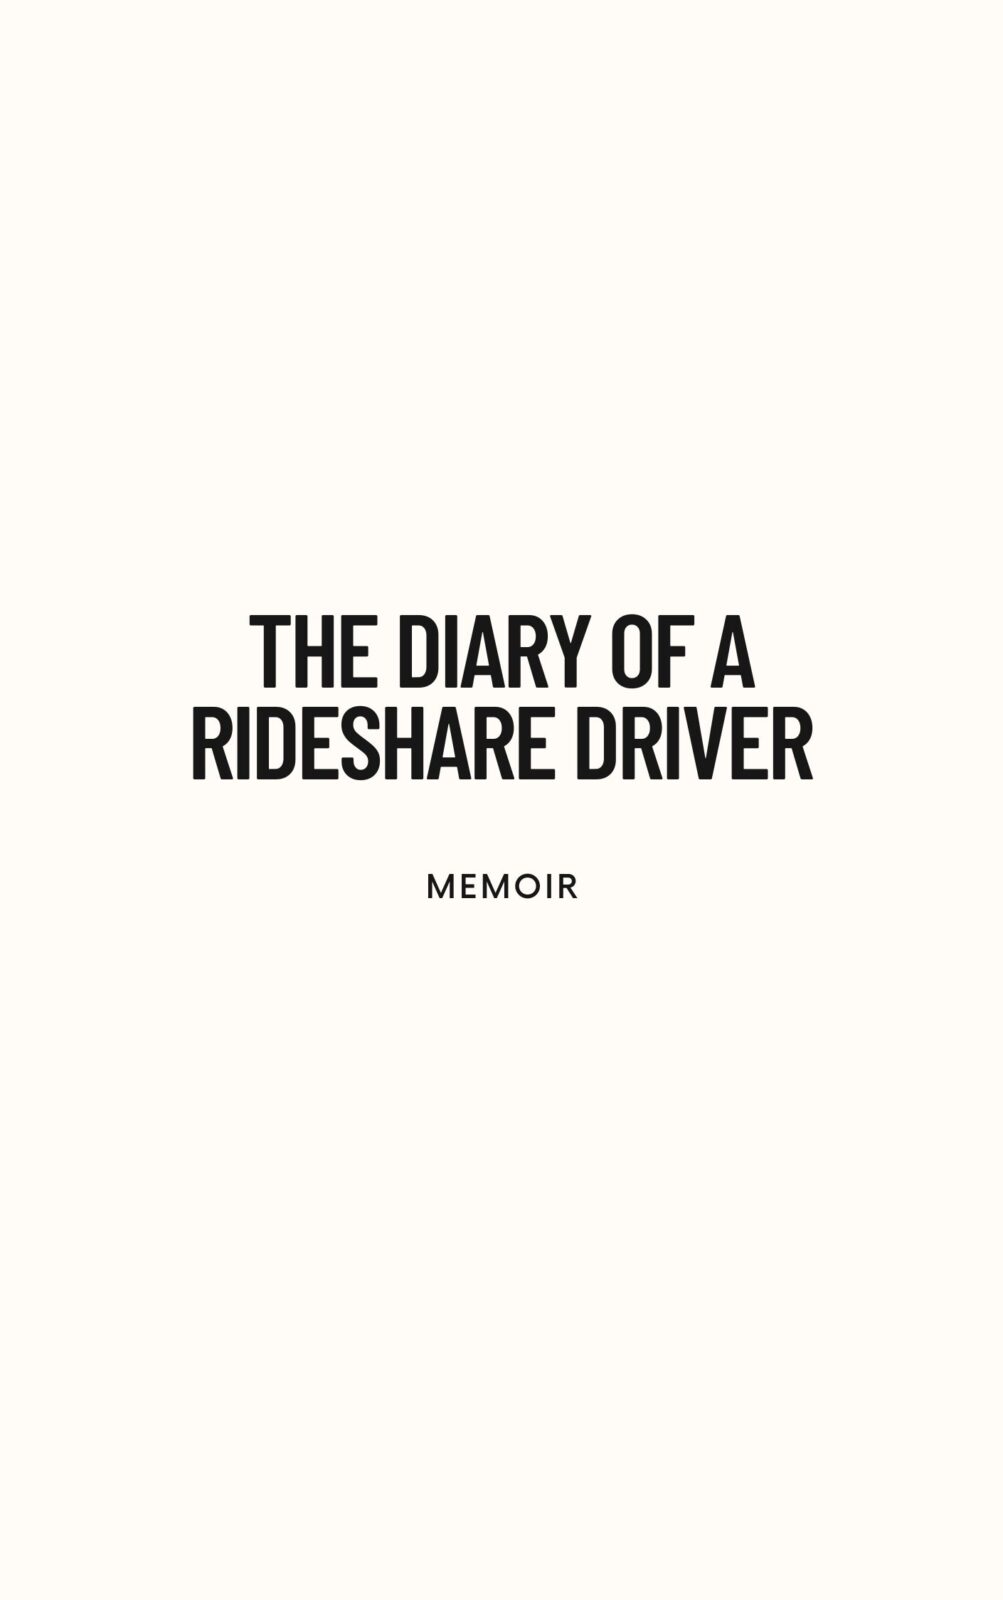 The diary of a rideshare driver